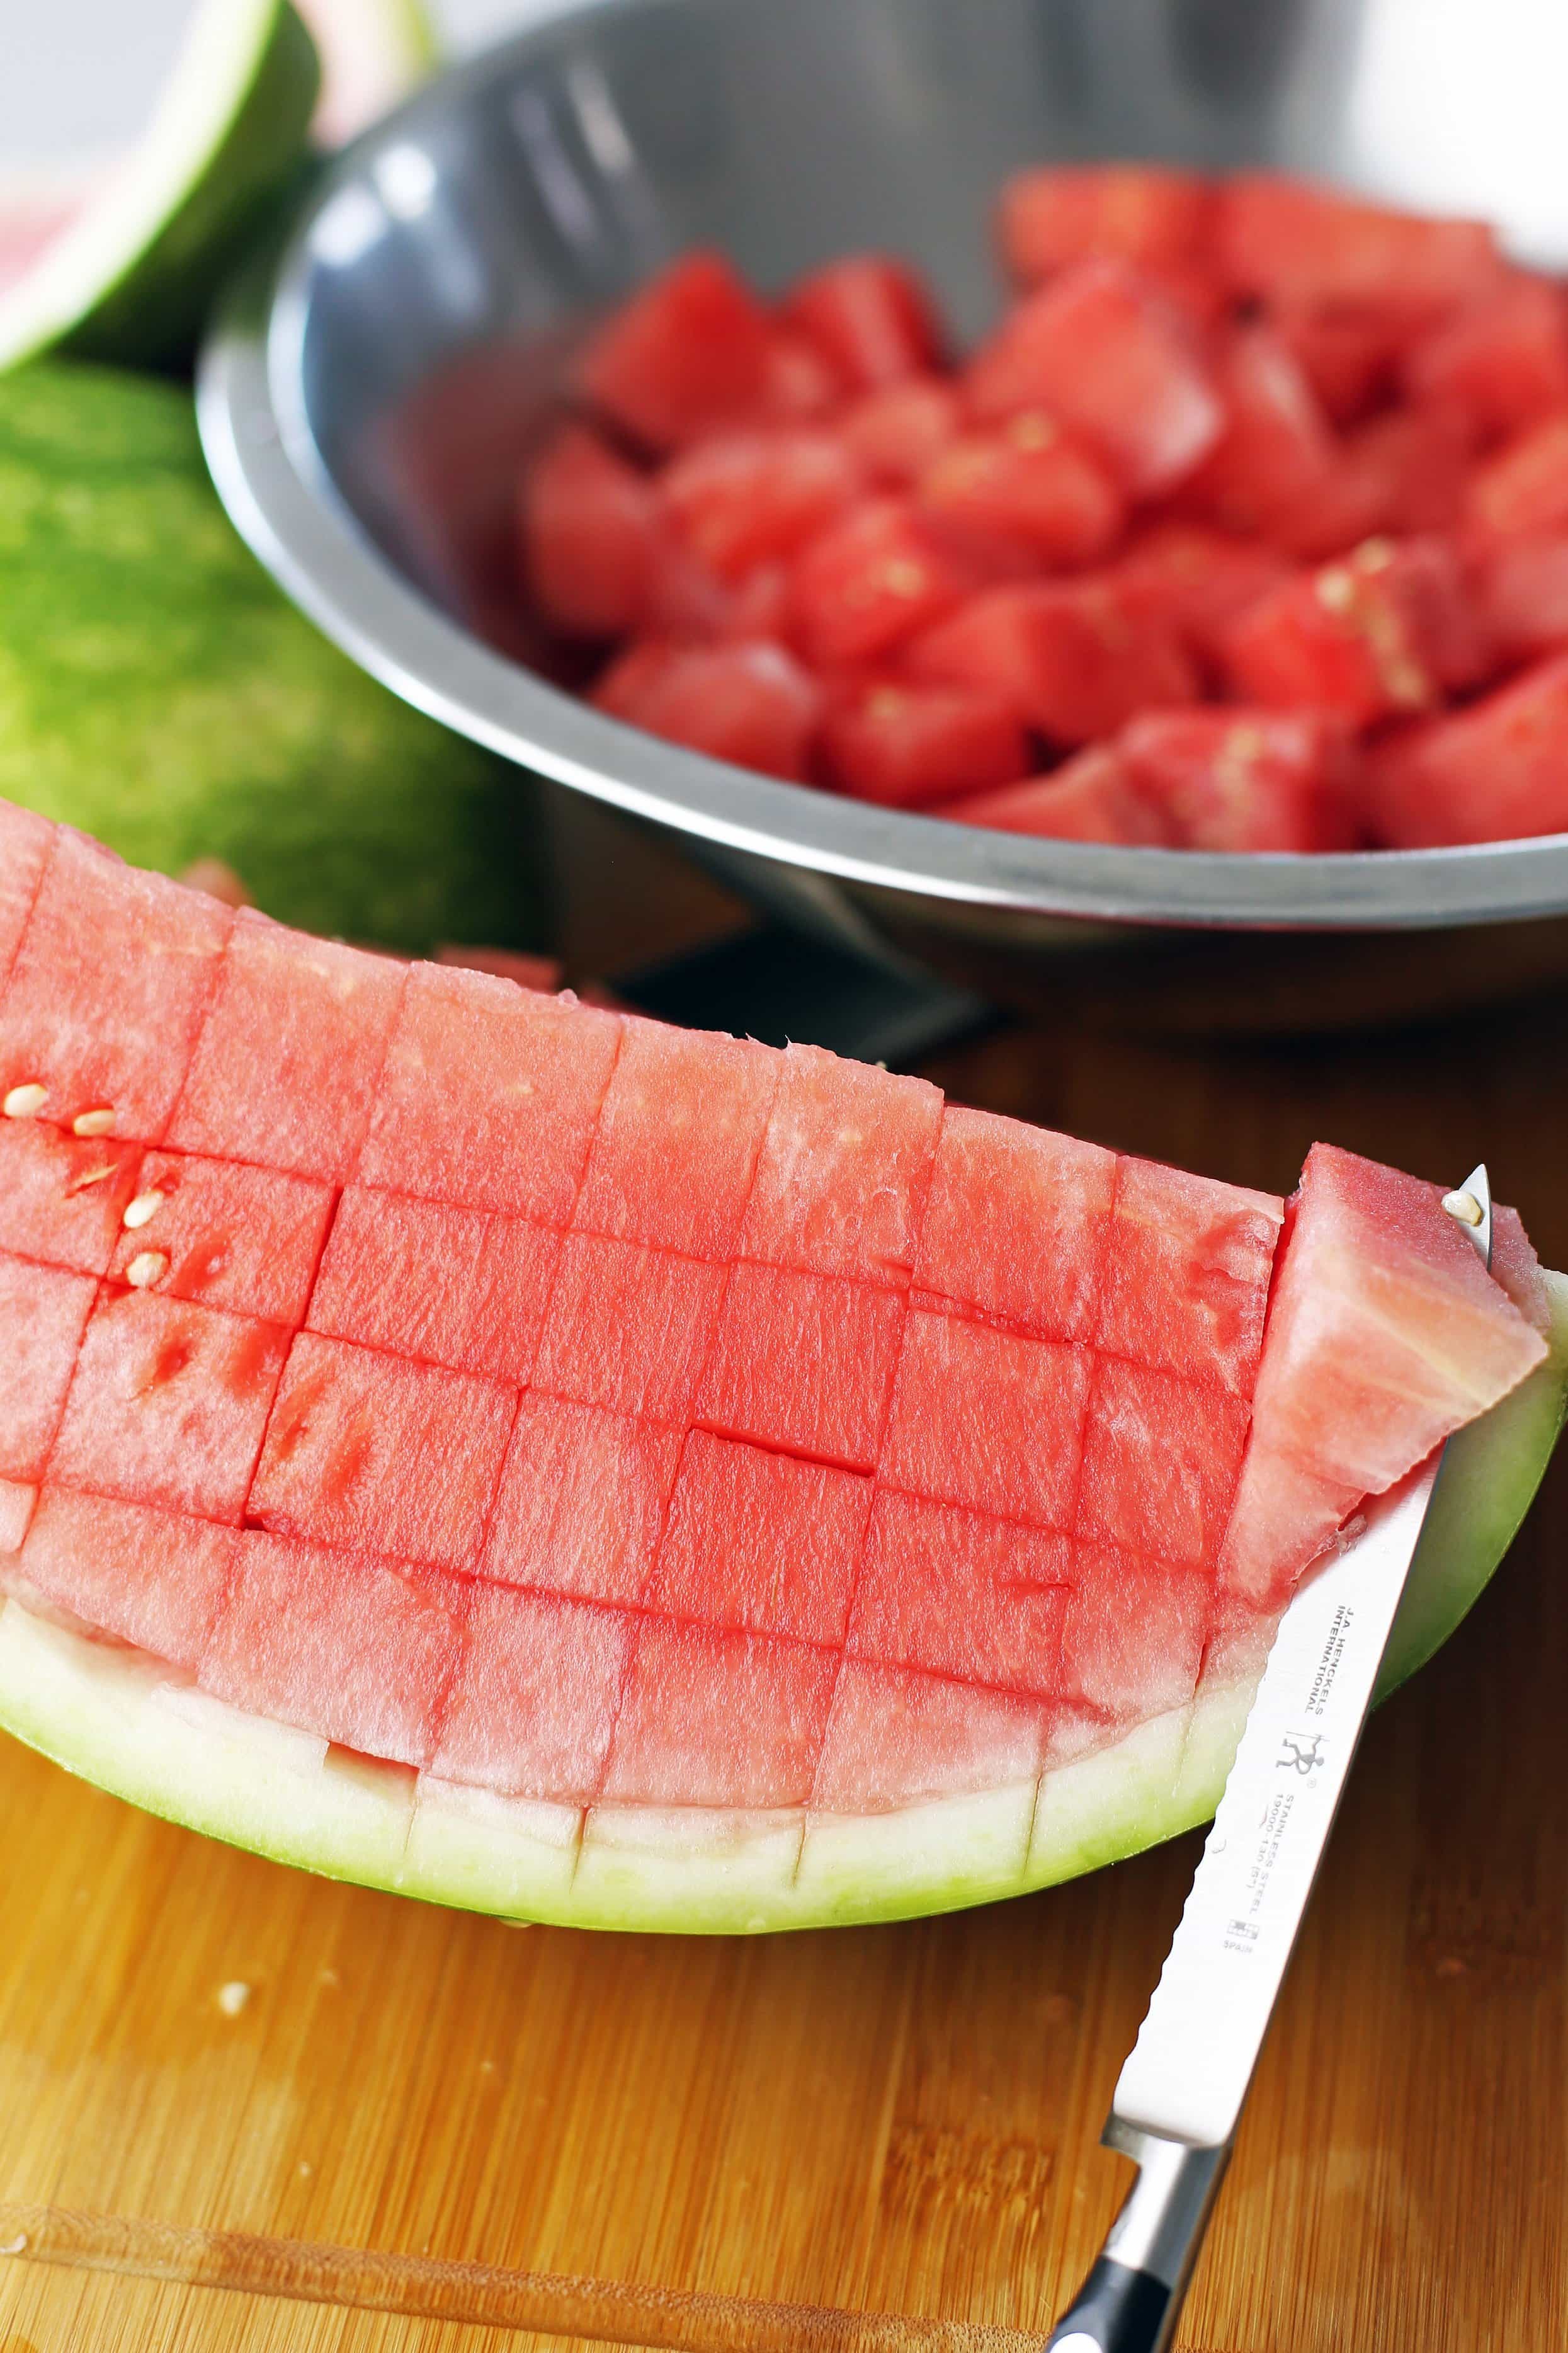 A quarter seedless watermelon with knife cuts in it with a serrated knife cutting into it.